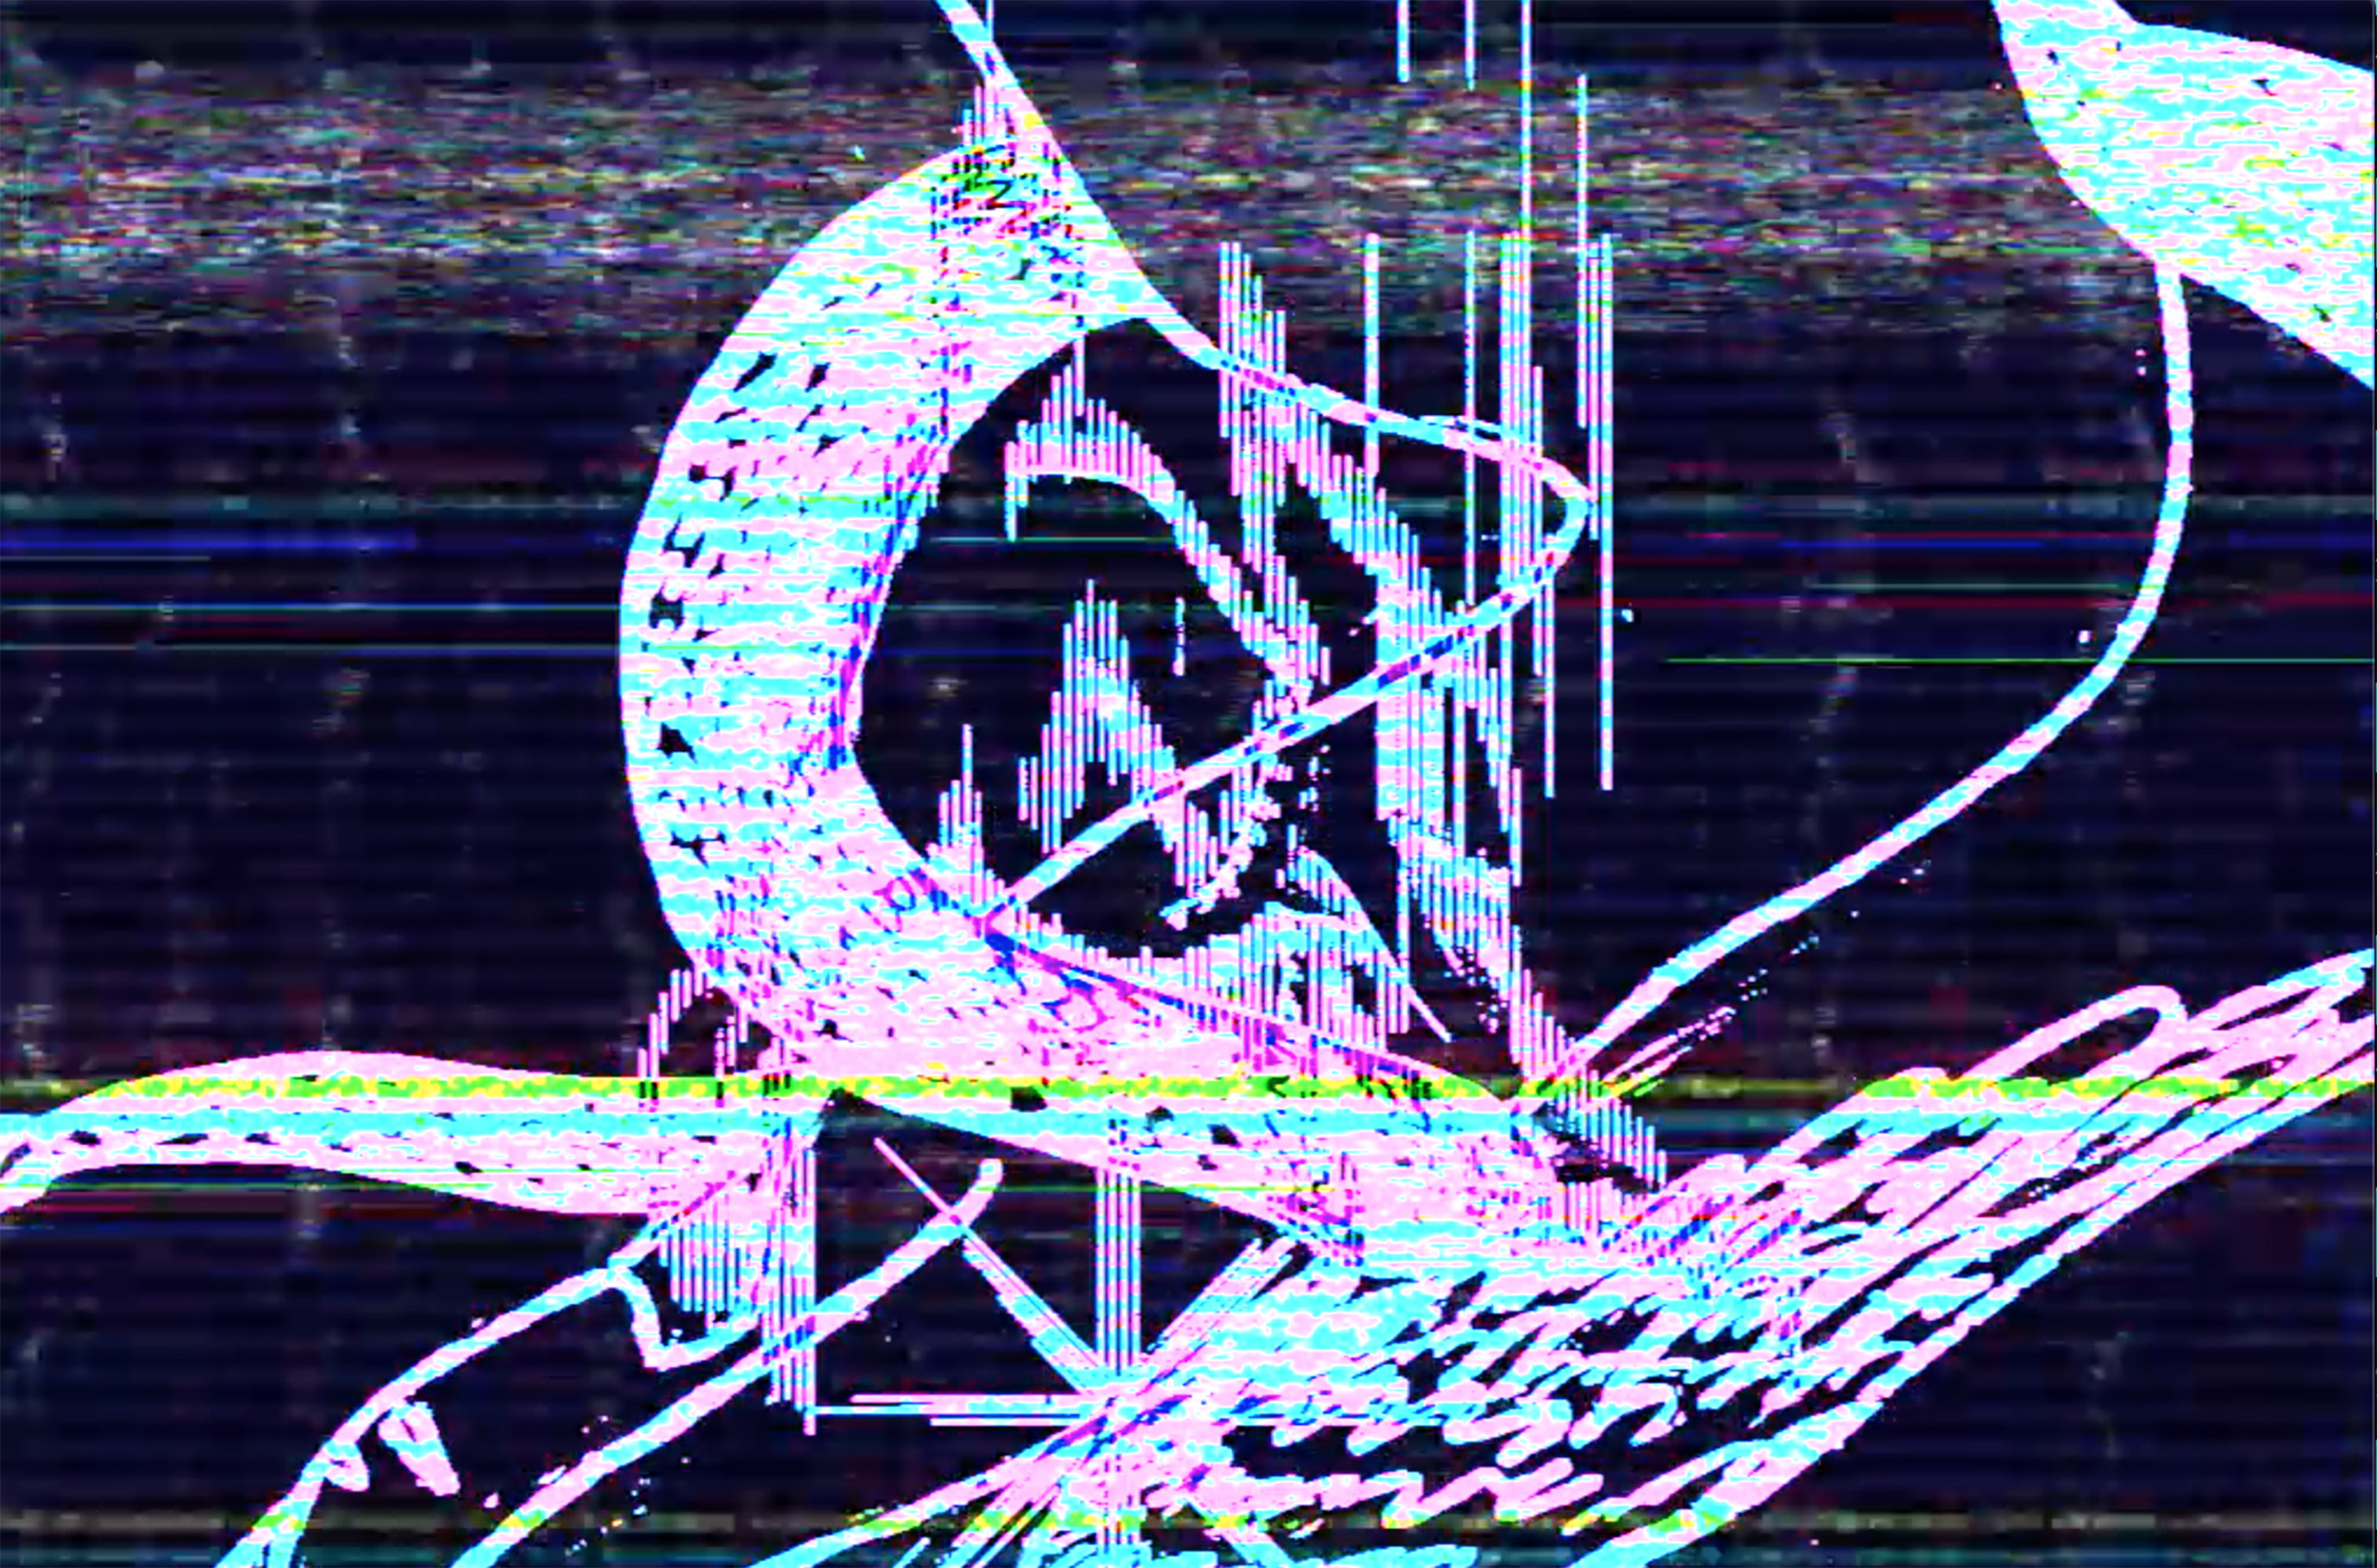 Digital graphics from the Glitch-Horoscope project representing the 13th zodiac sign of the Ophiuchus. 2019